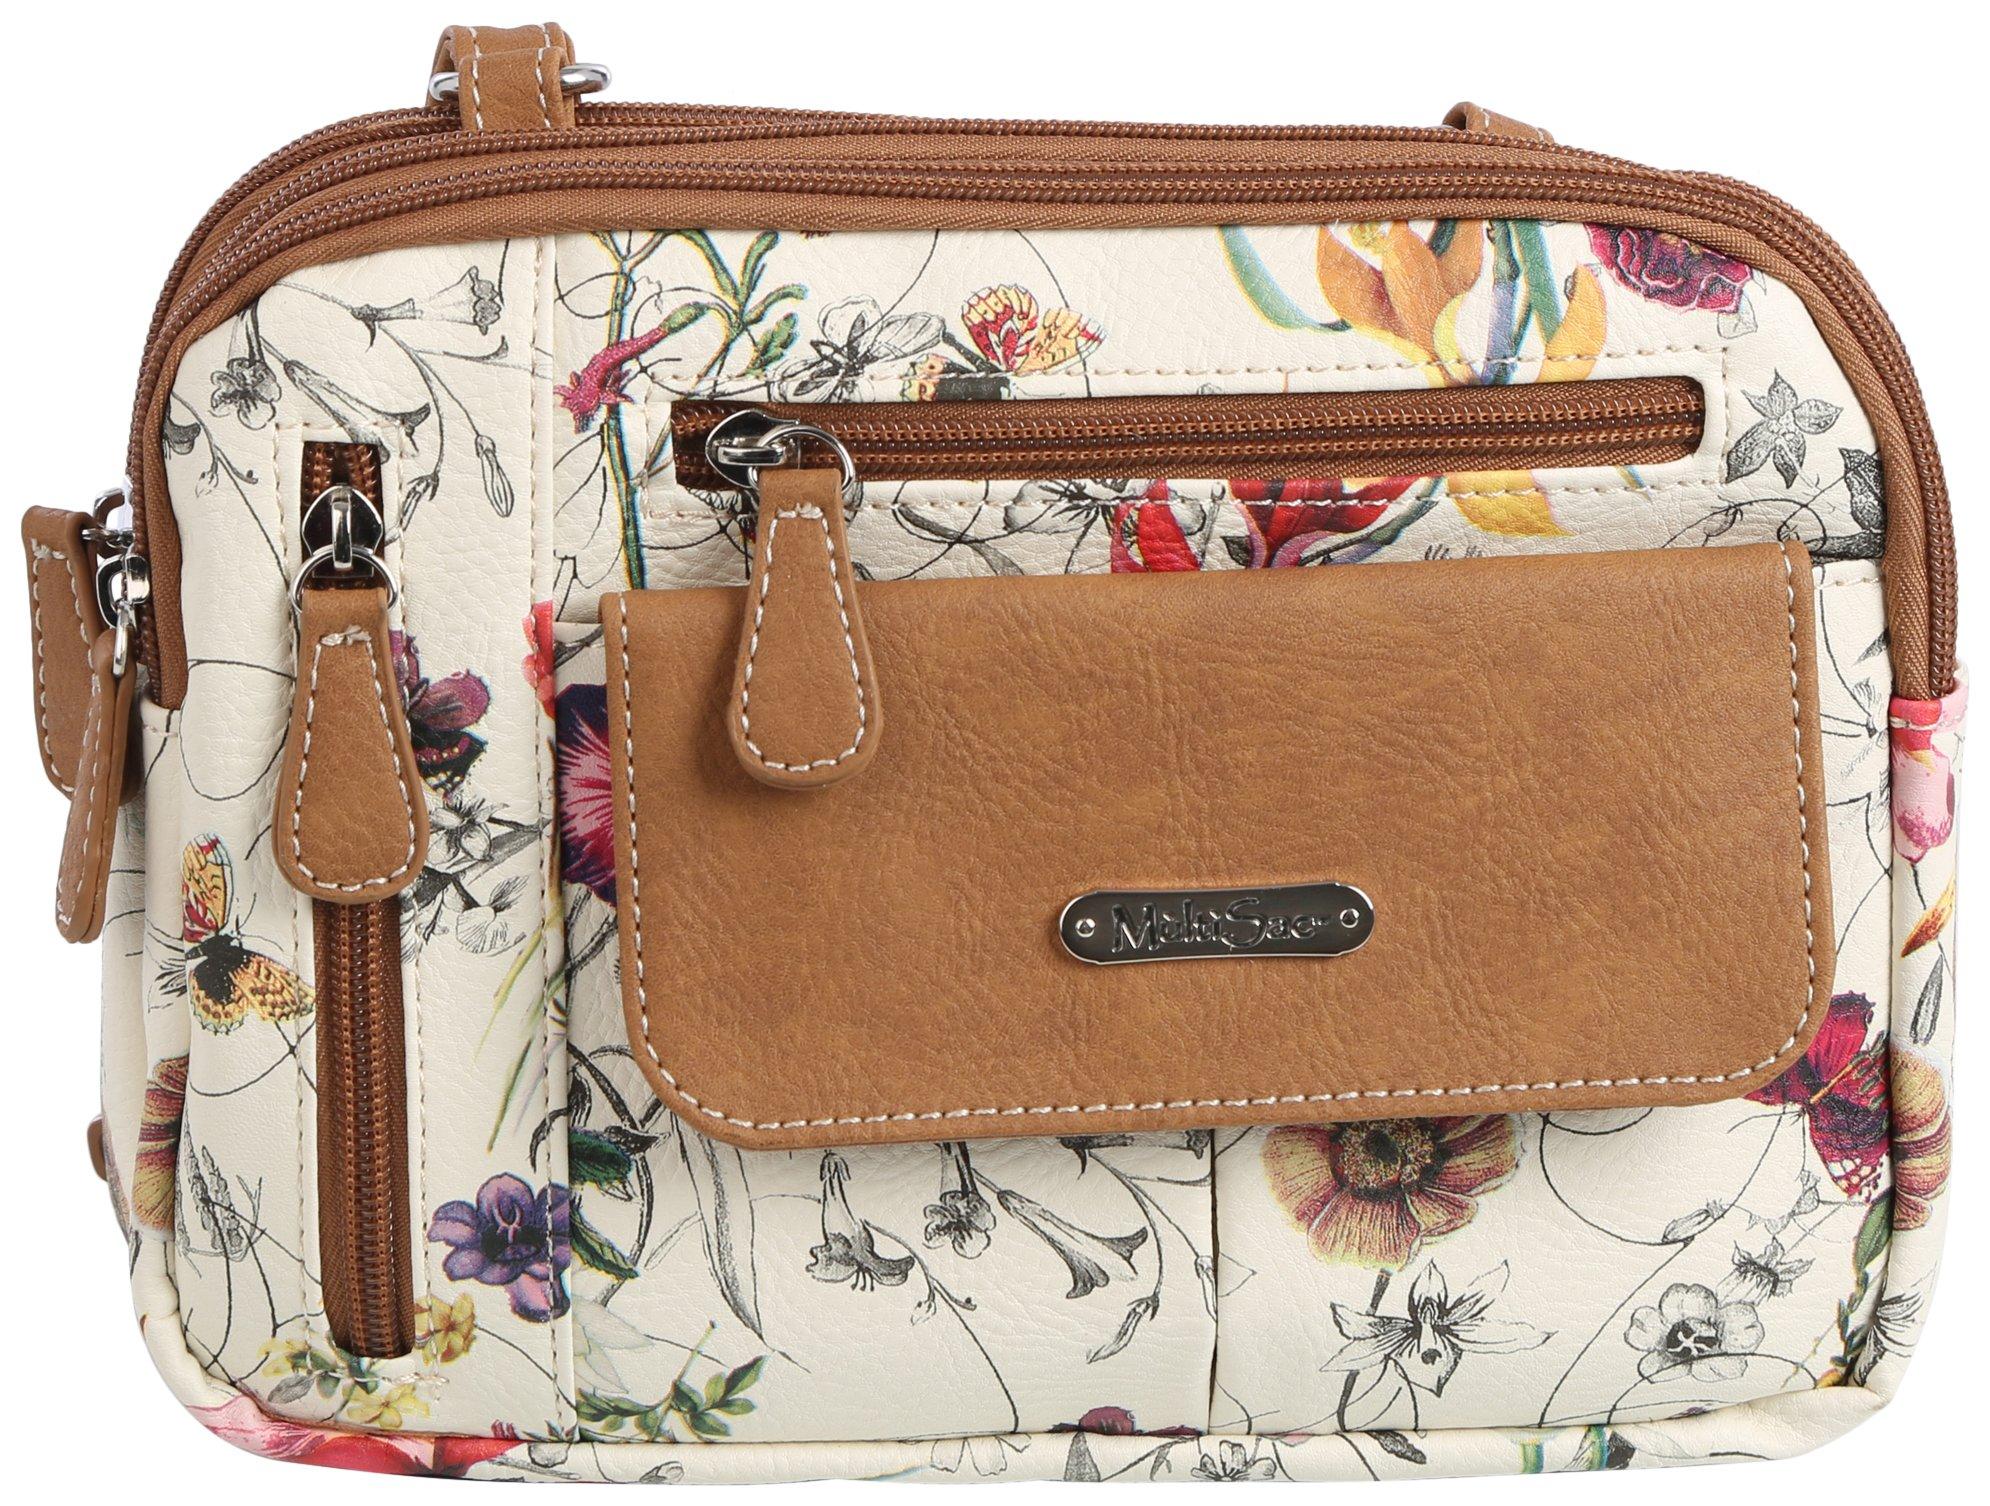 MultiSac Zippy Floral/Solid 3-Compartment Crossbody Bag